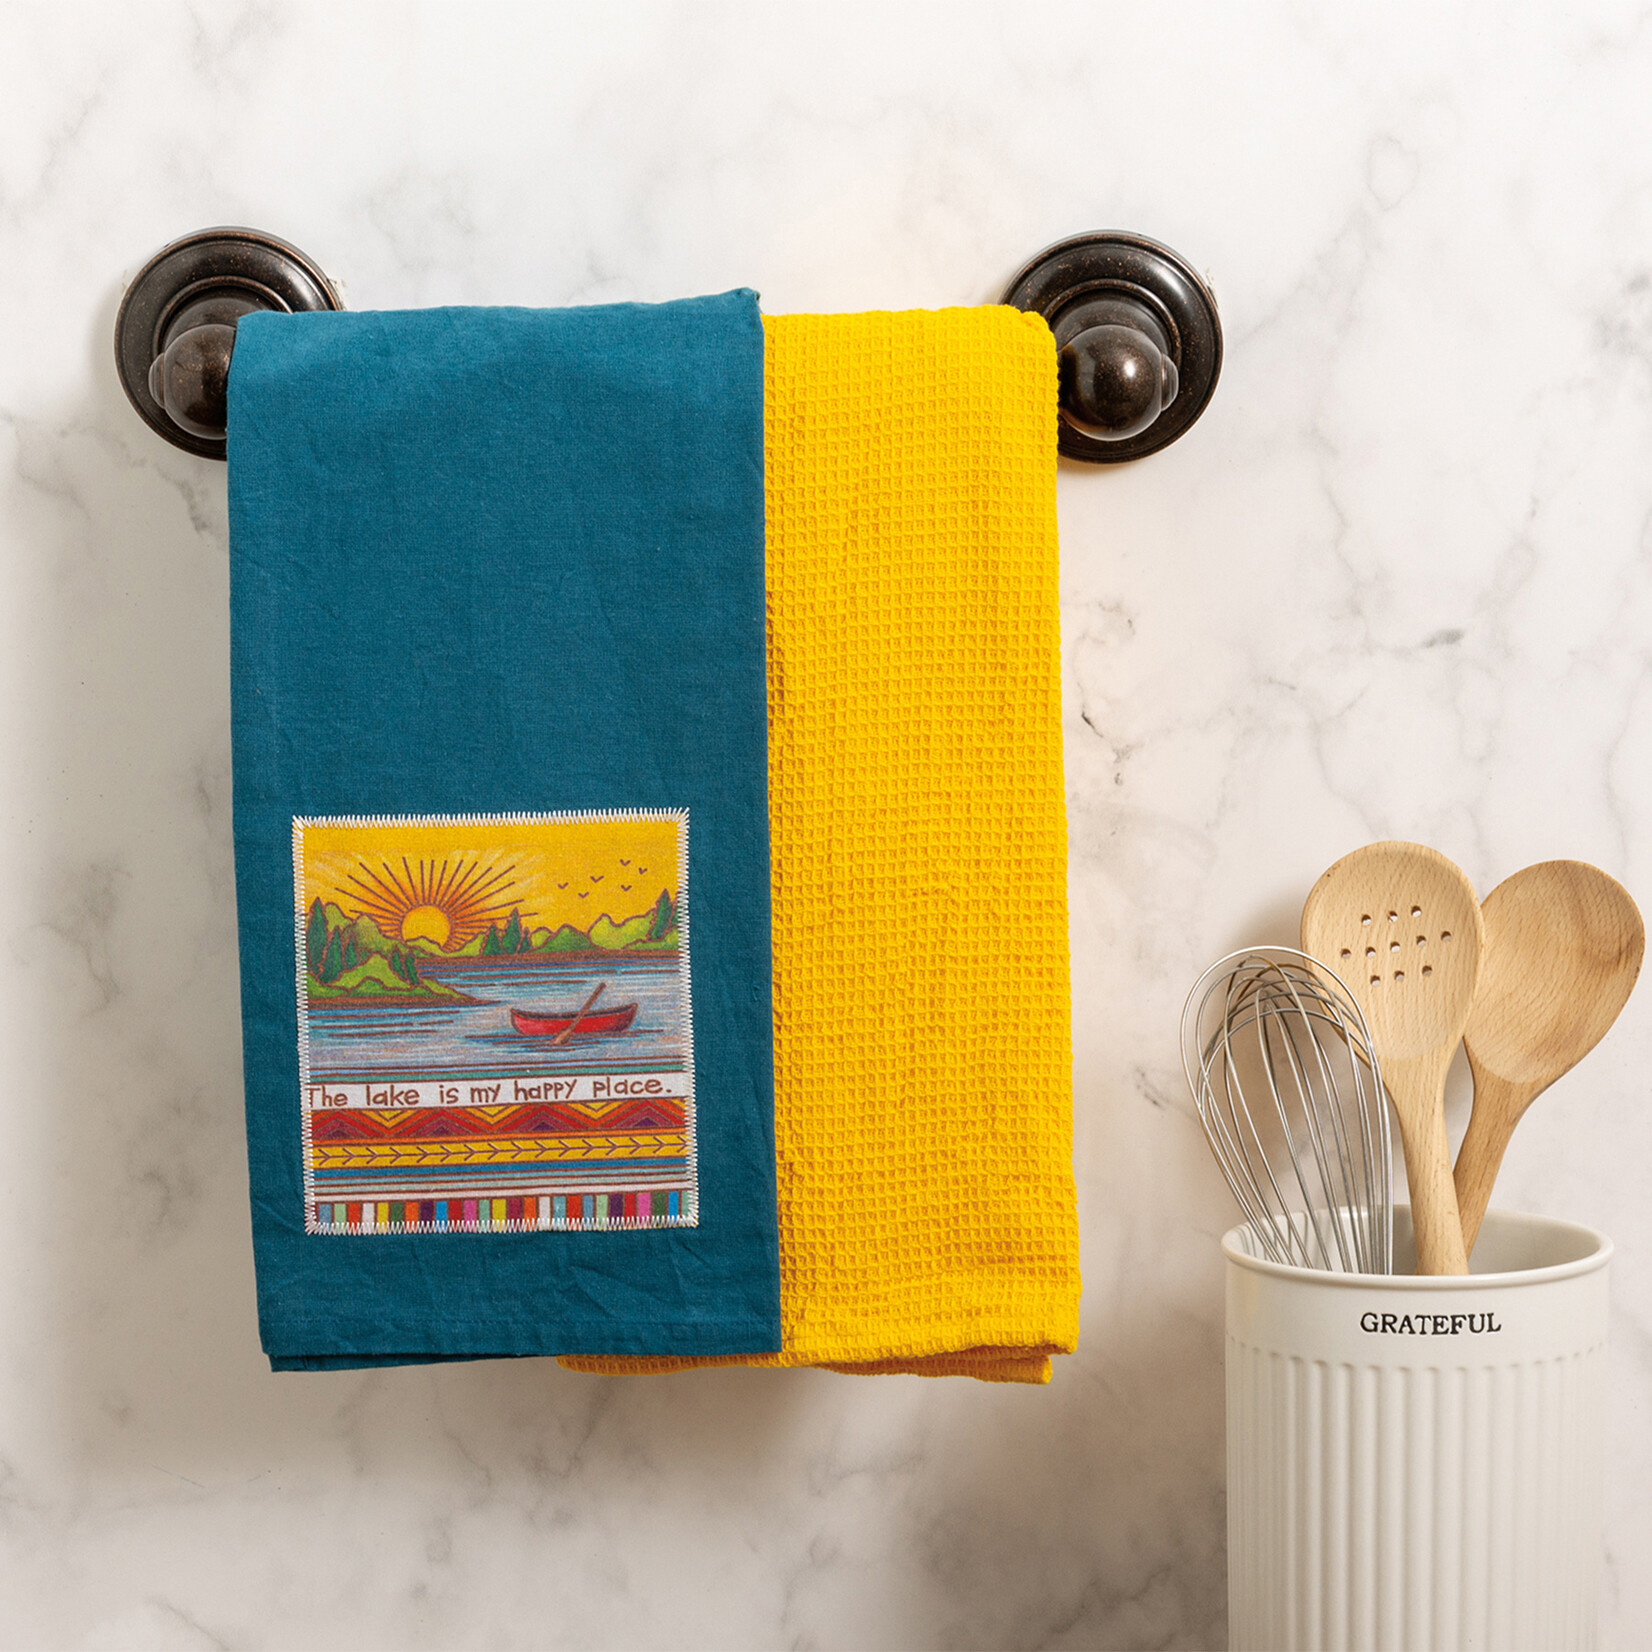 Primitives by Kathy Lake Is My Happy Place Kitchen Towel